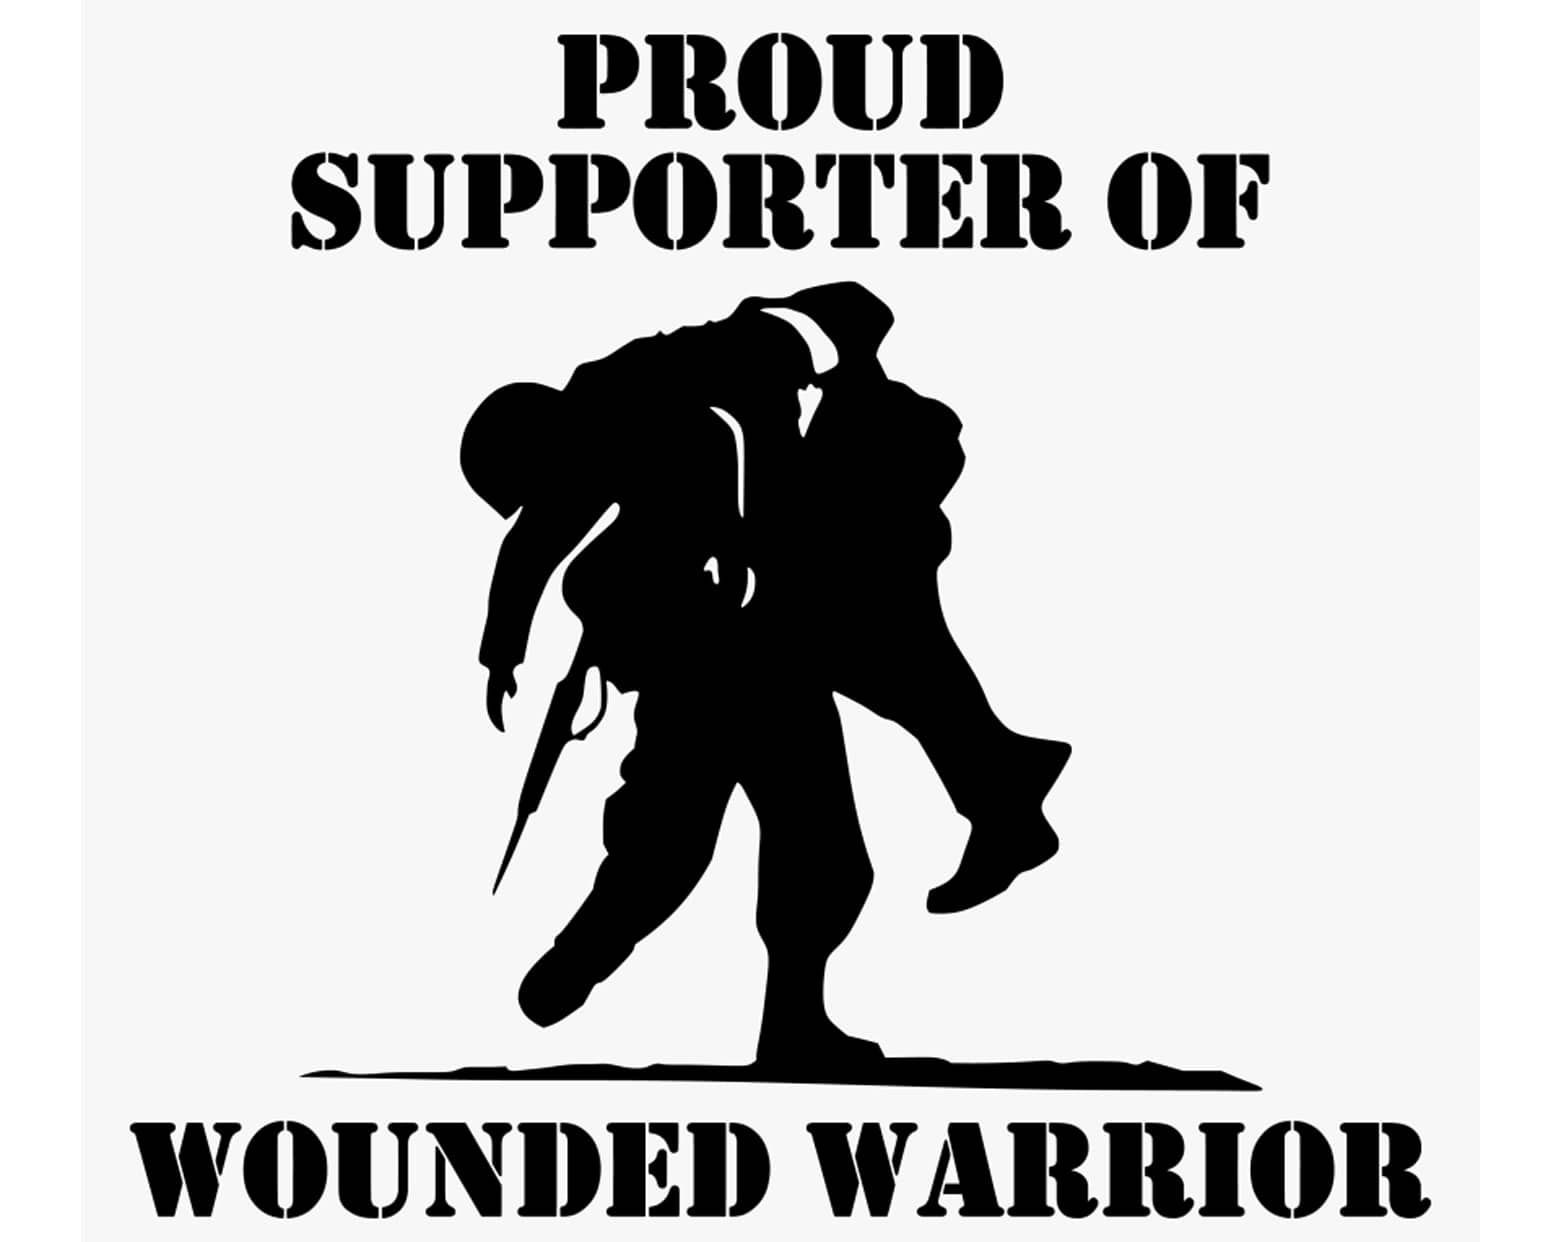 wwp, wounded warrior, wounded warrior project